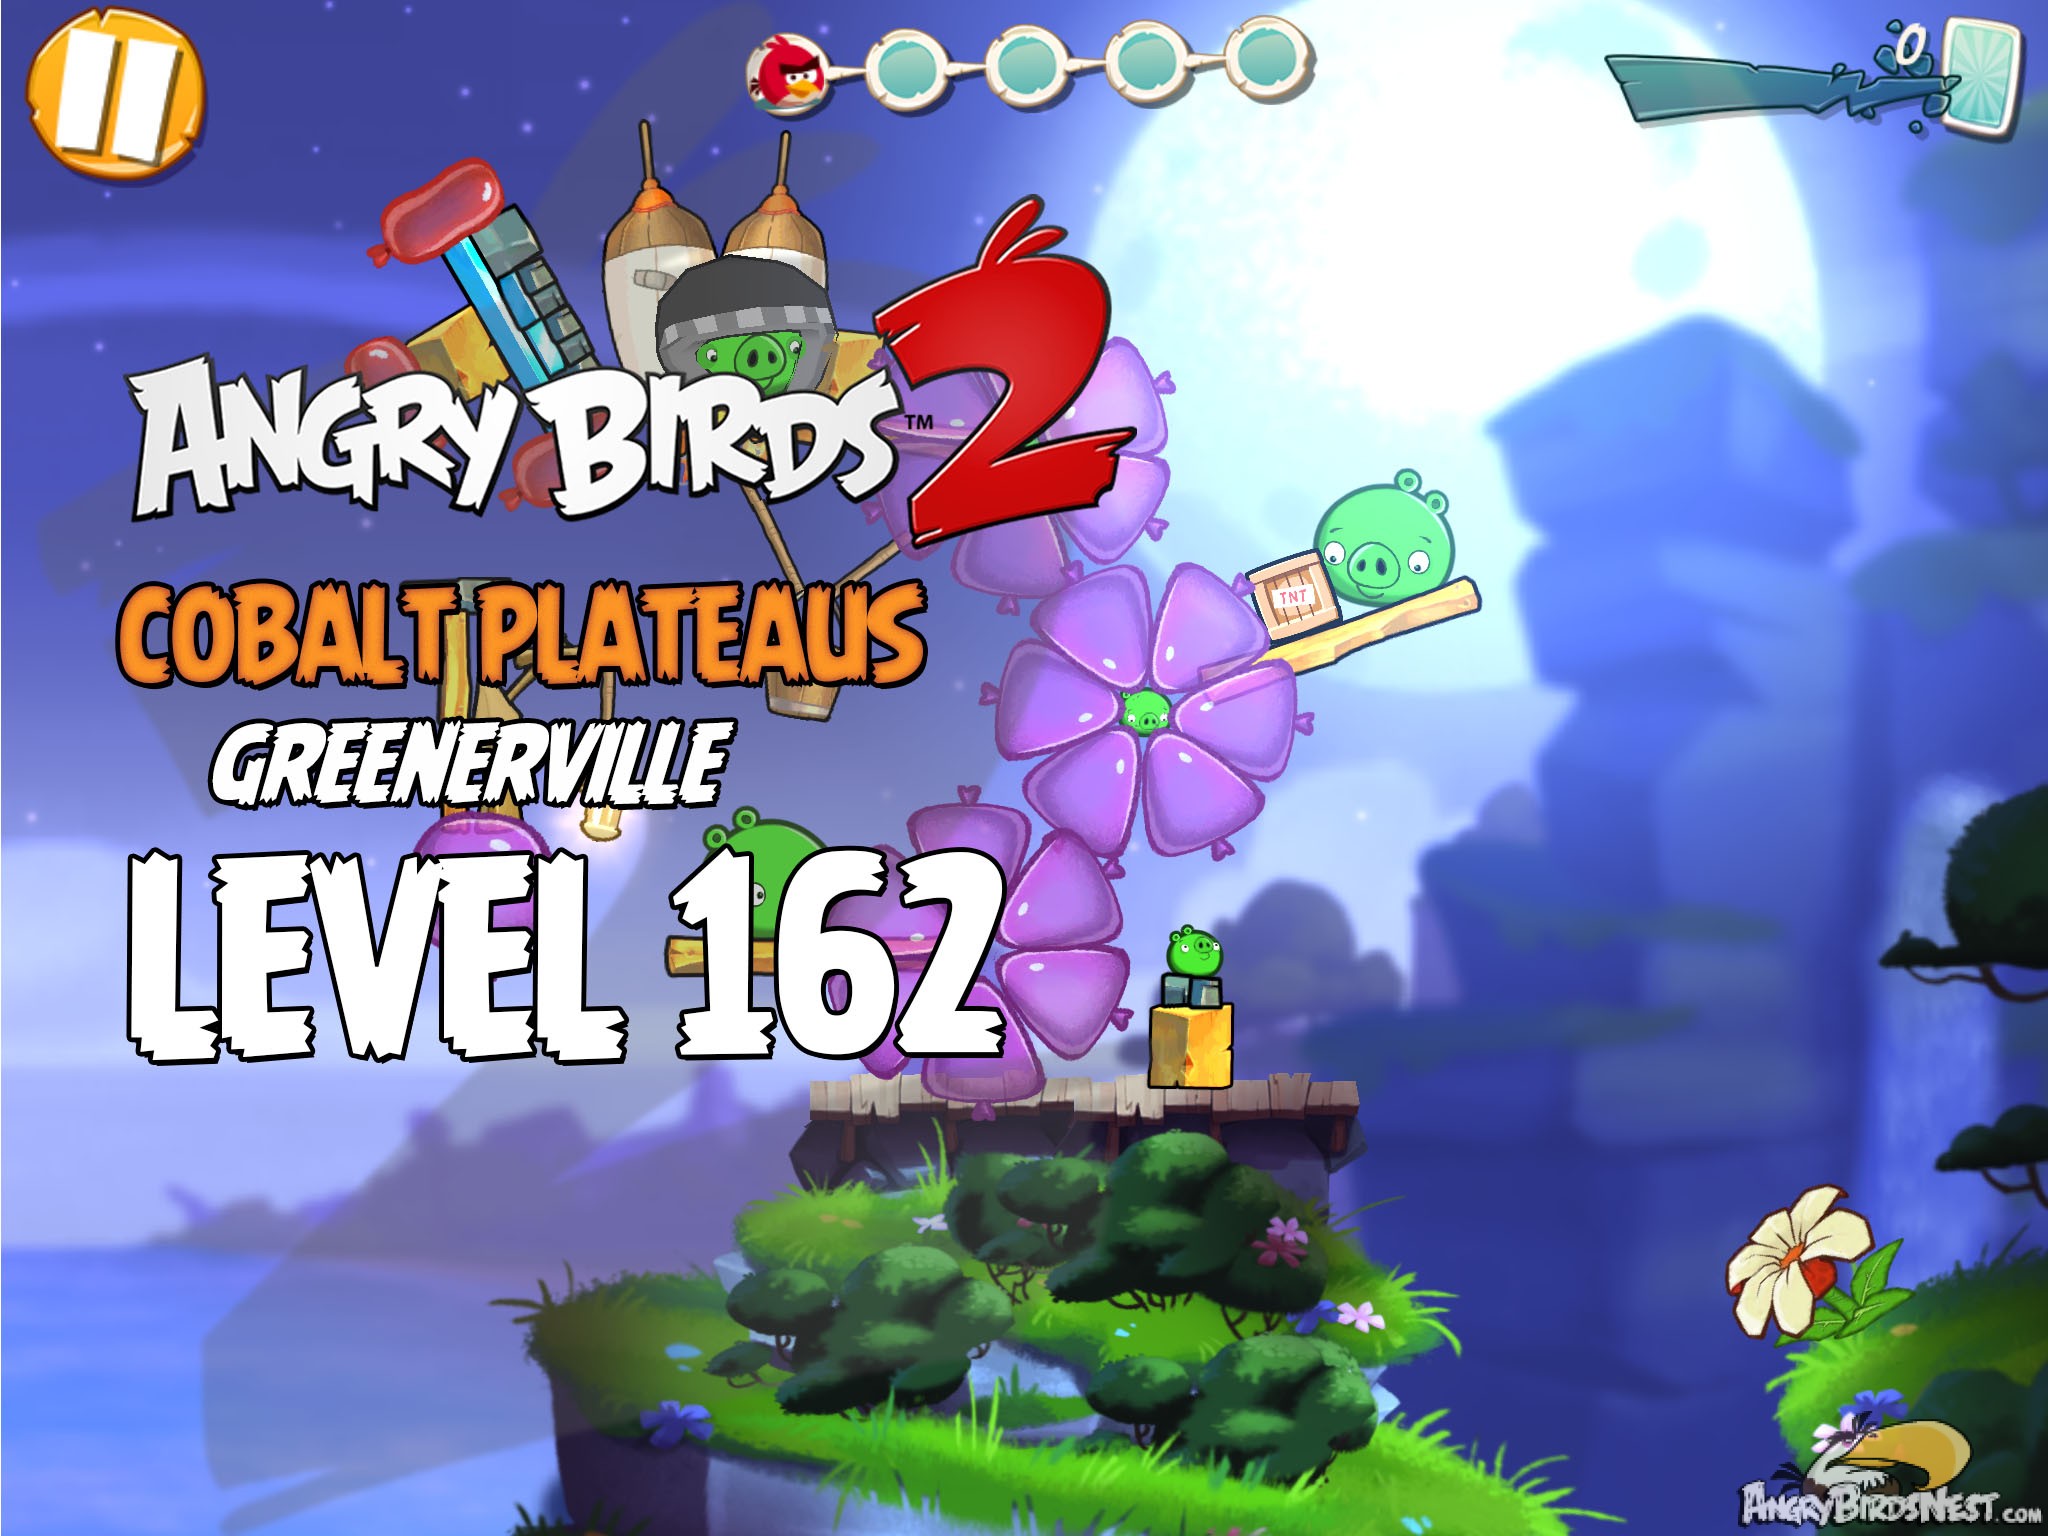 Angry Birds 2 Cobalt Plateaus Greenerville Level 162